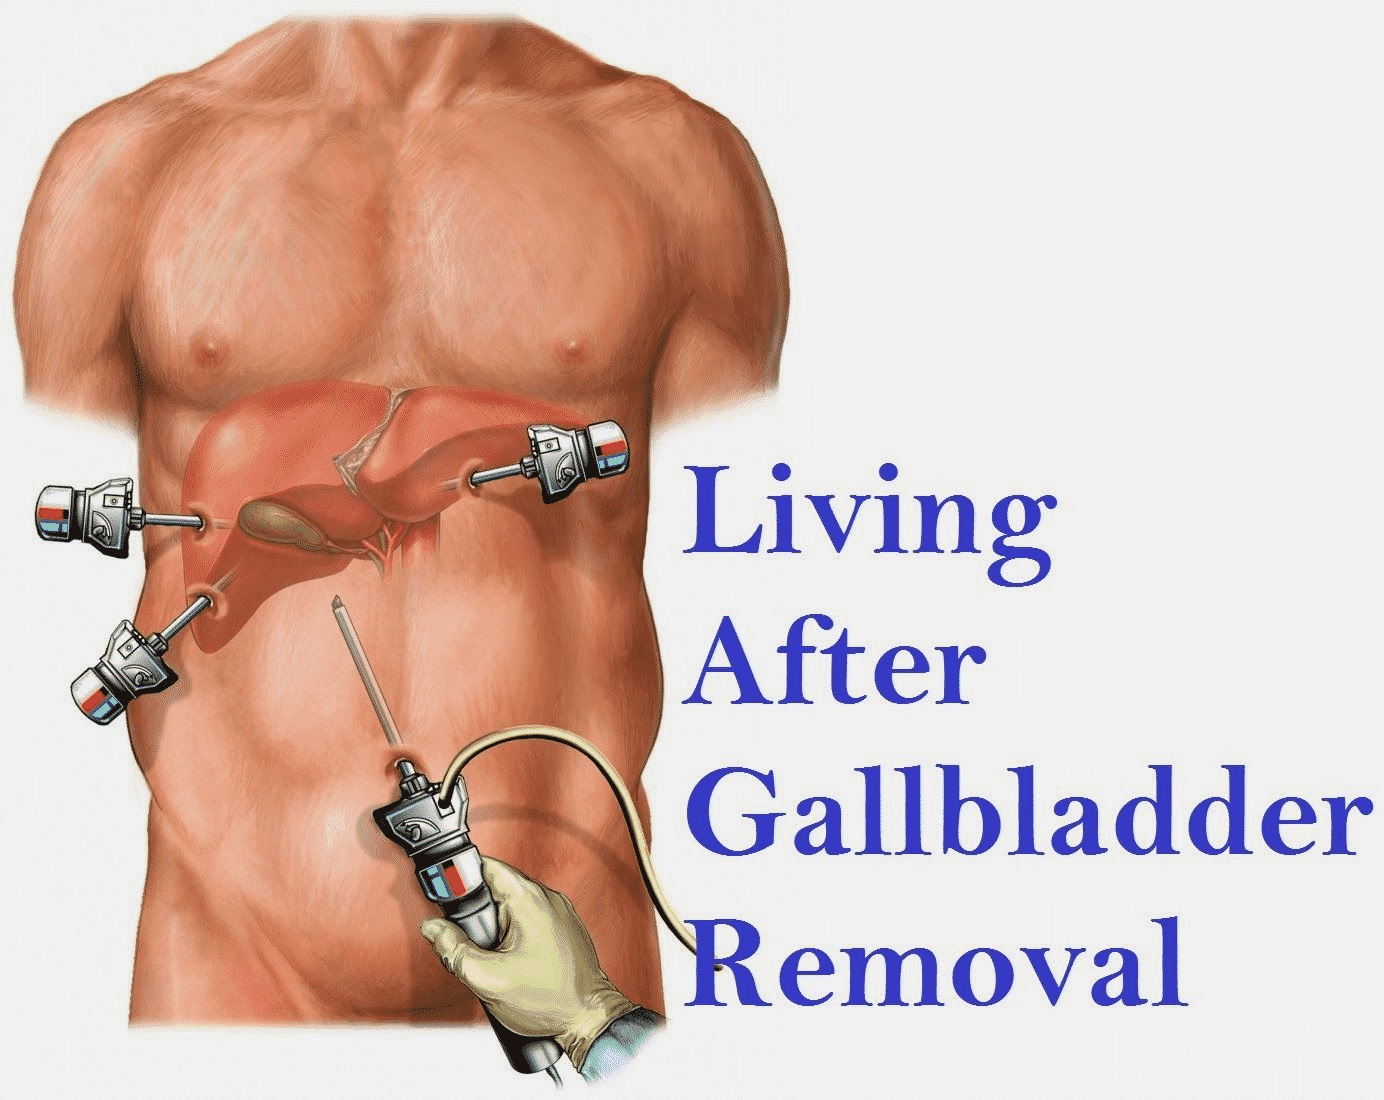 Gallbladder Removal Surgery: Symptoms, Treatment, And Benefits